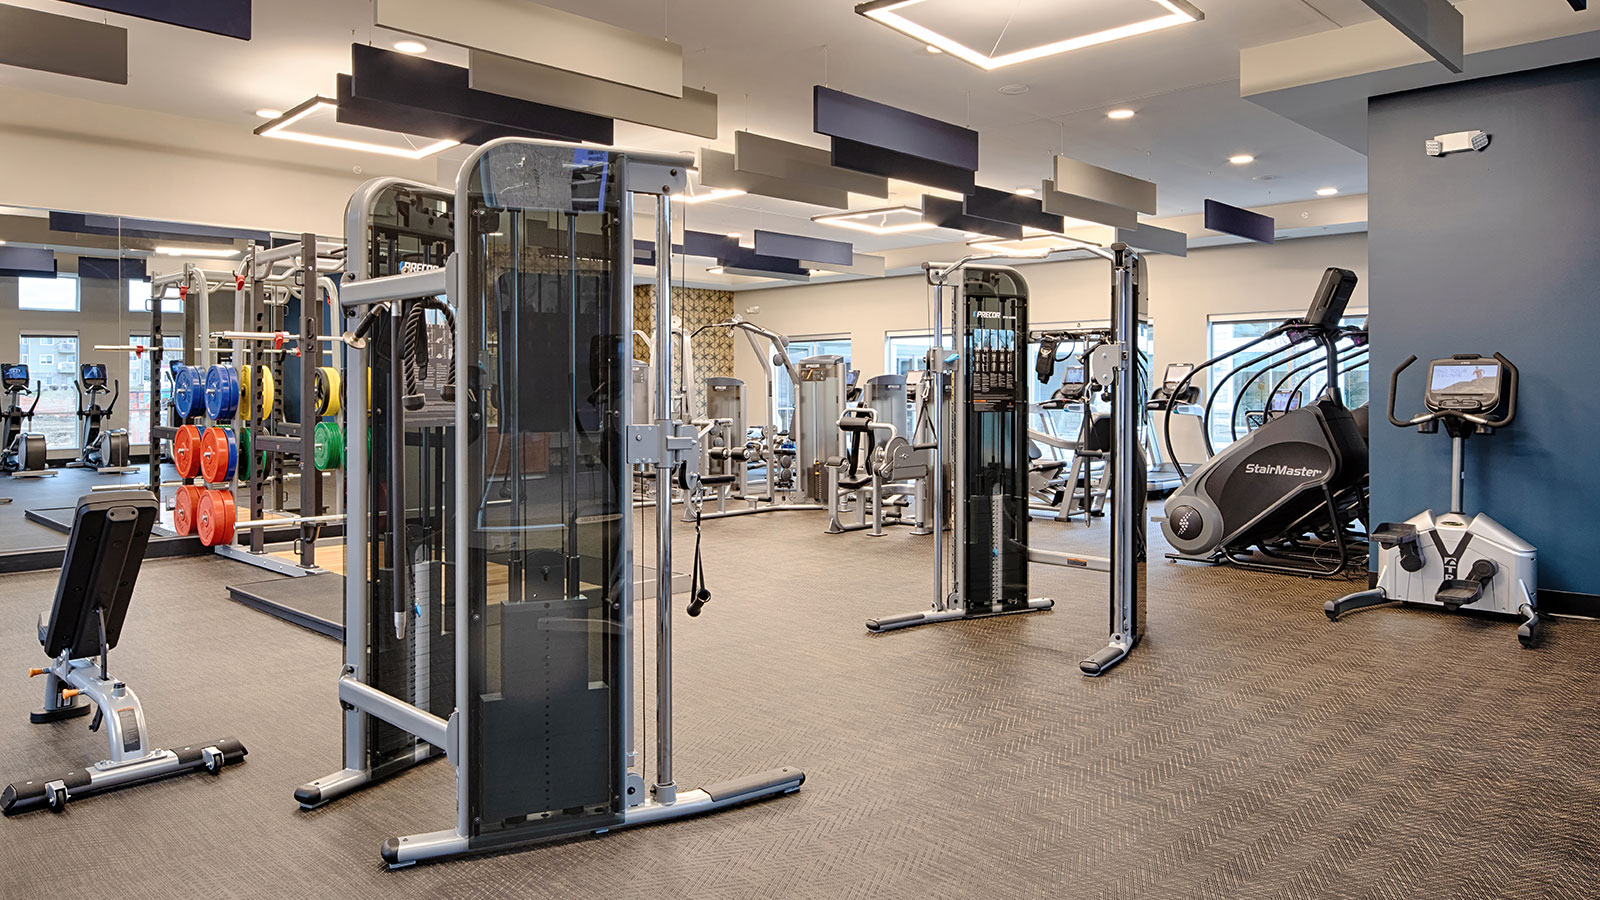 State of the art fitness center with cardio and weight machines